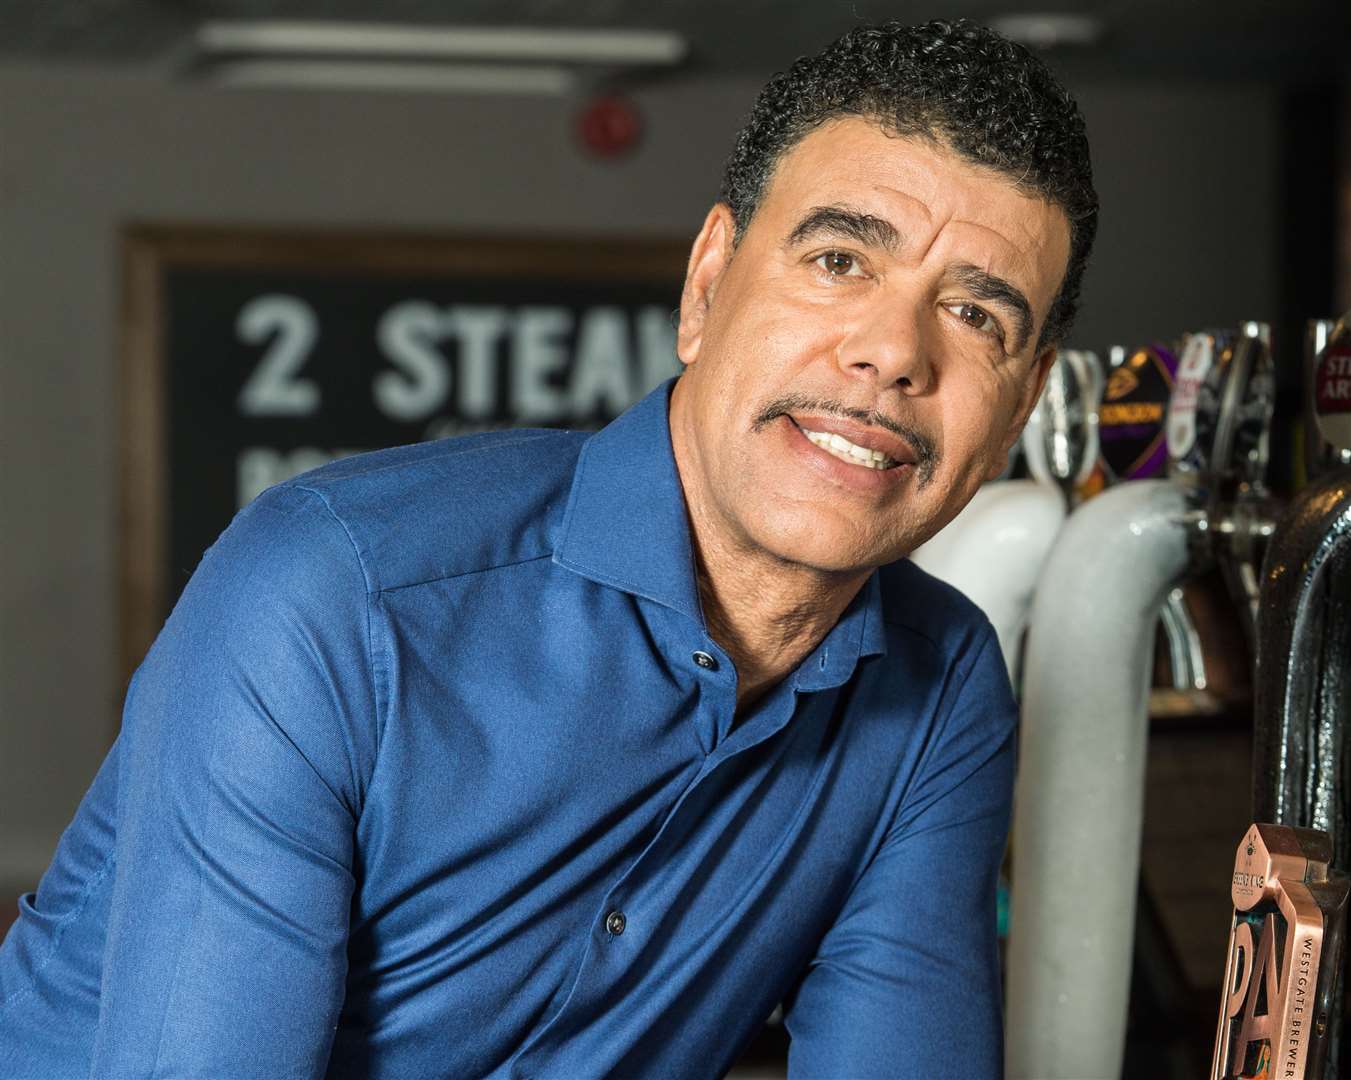 Chris Kamara is looking for the most dedicated sports fans